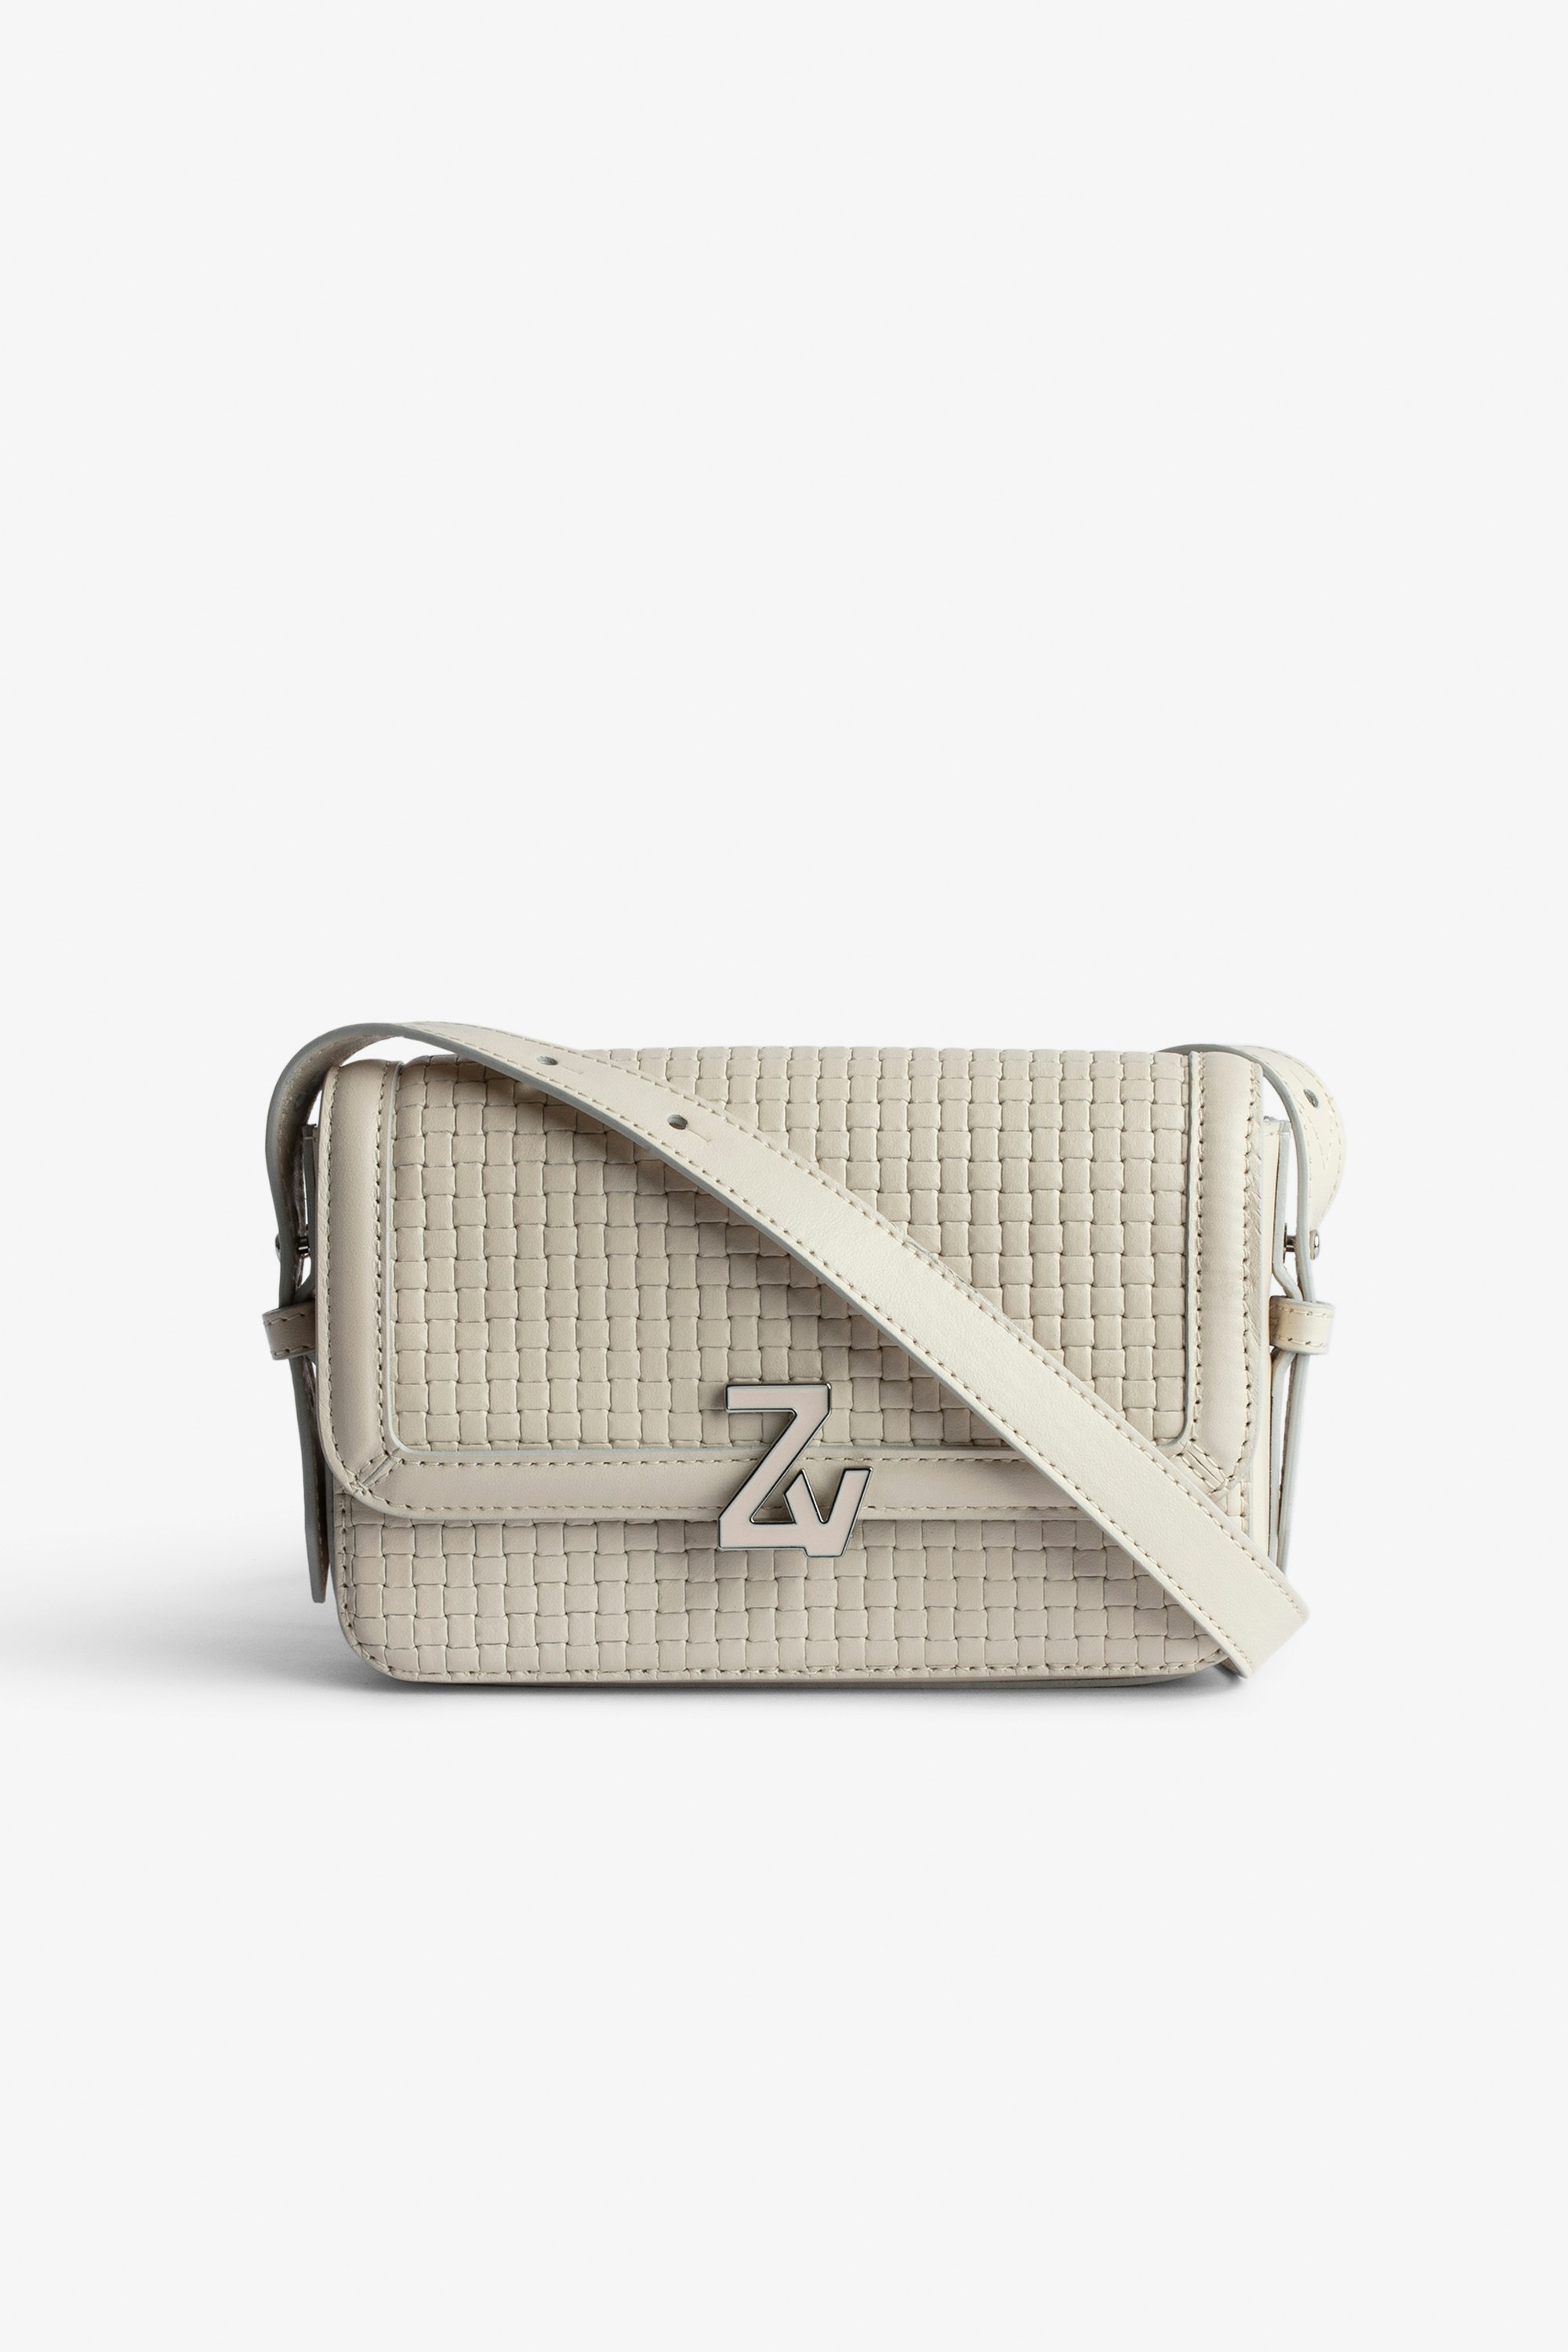 ZV Initiale Le Mini Bag  Women’s small bag in ecru latticework leather with a shoulder strap and ZV clasp